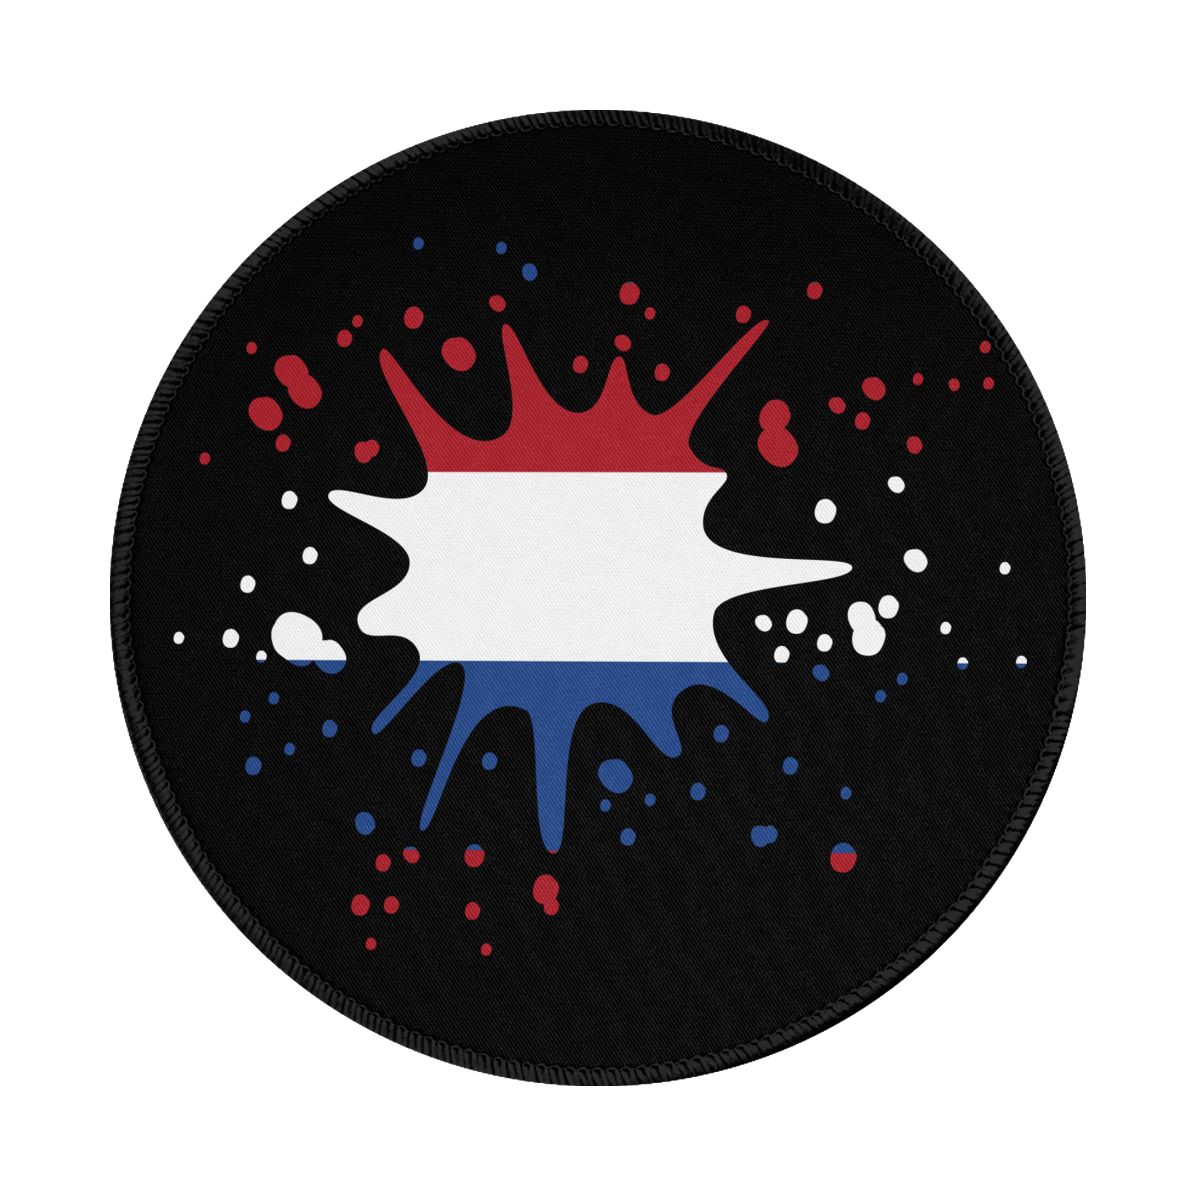 Netherlands Ink Spatter Gaming Round Mousepad for Computer Laptop